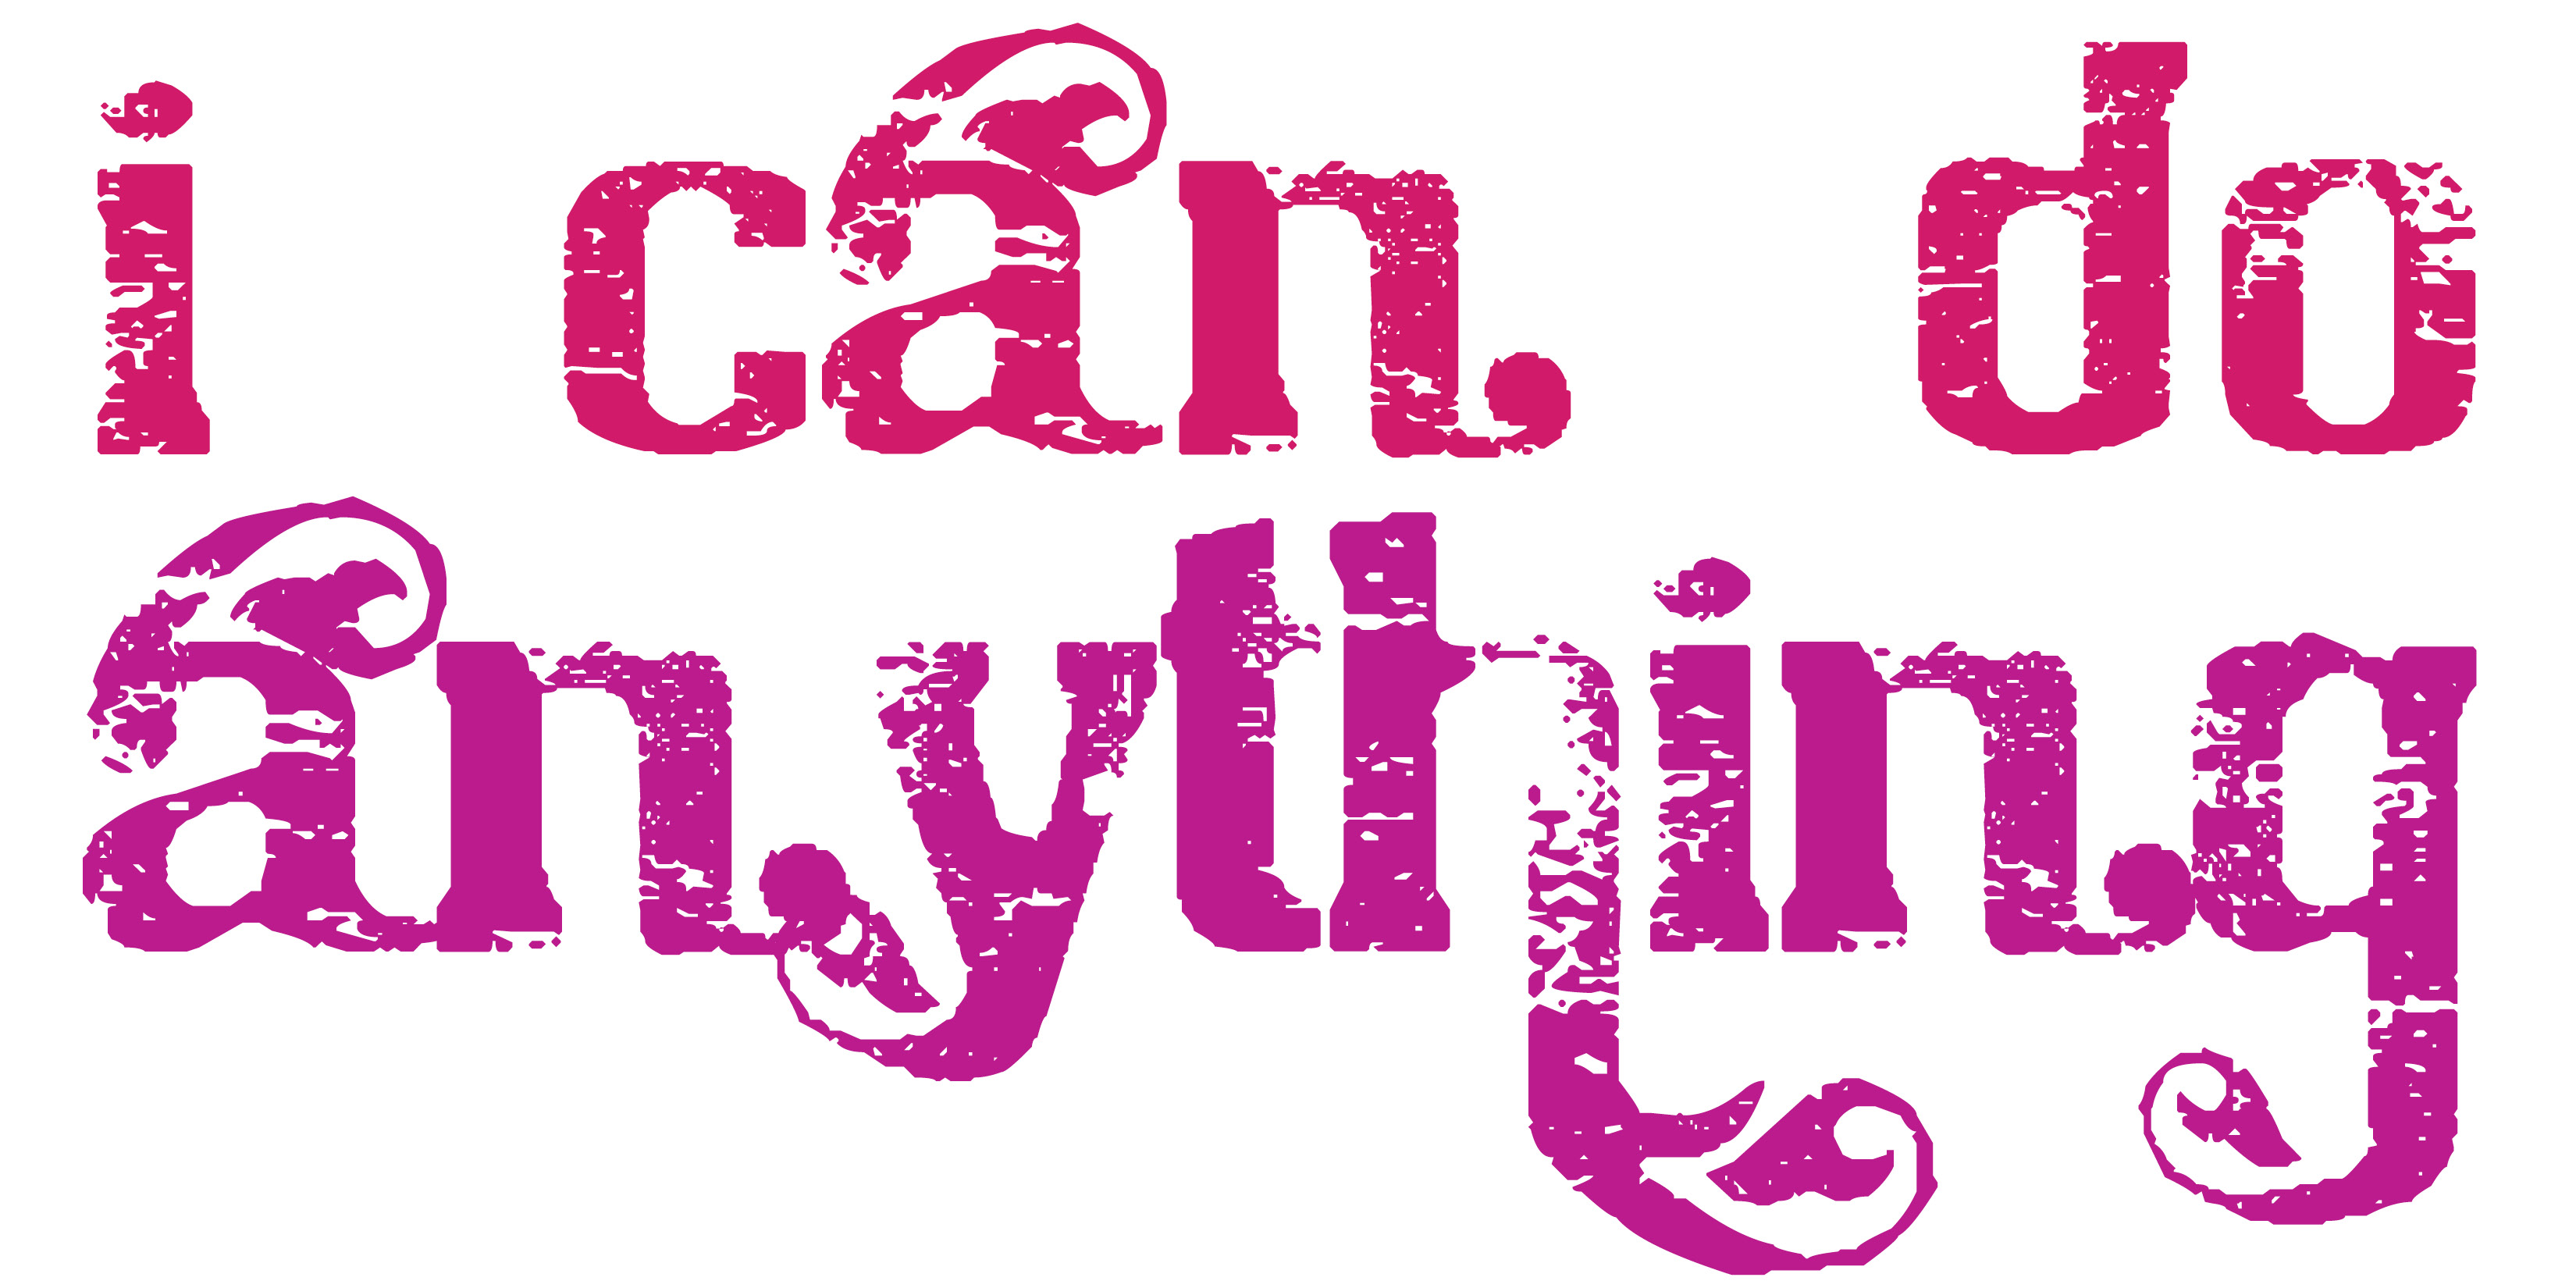 This can have anything. Can надпись. I can do anything. You can do anything. I can everything.